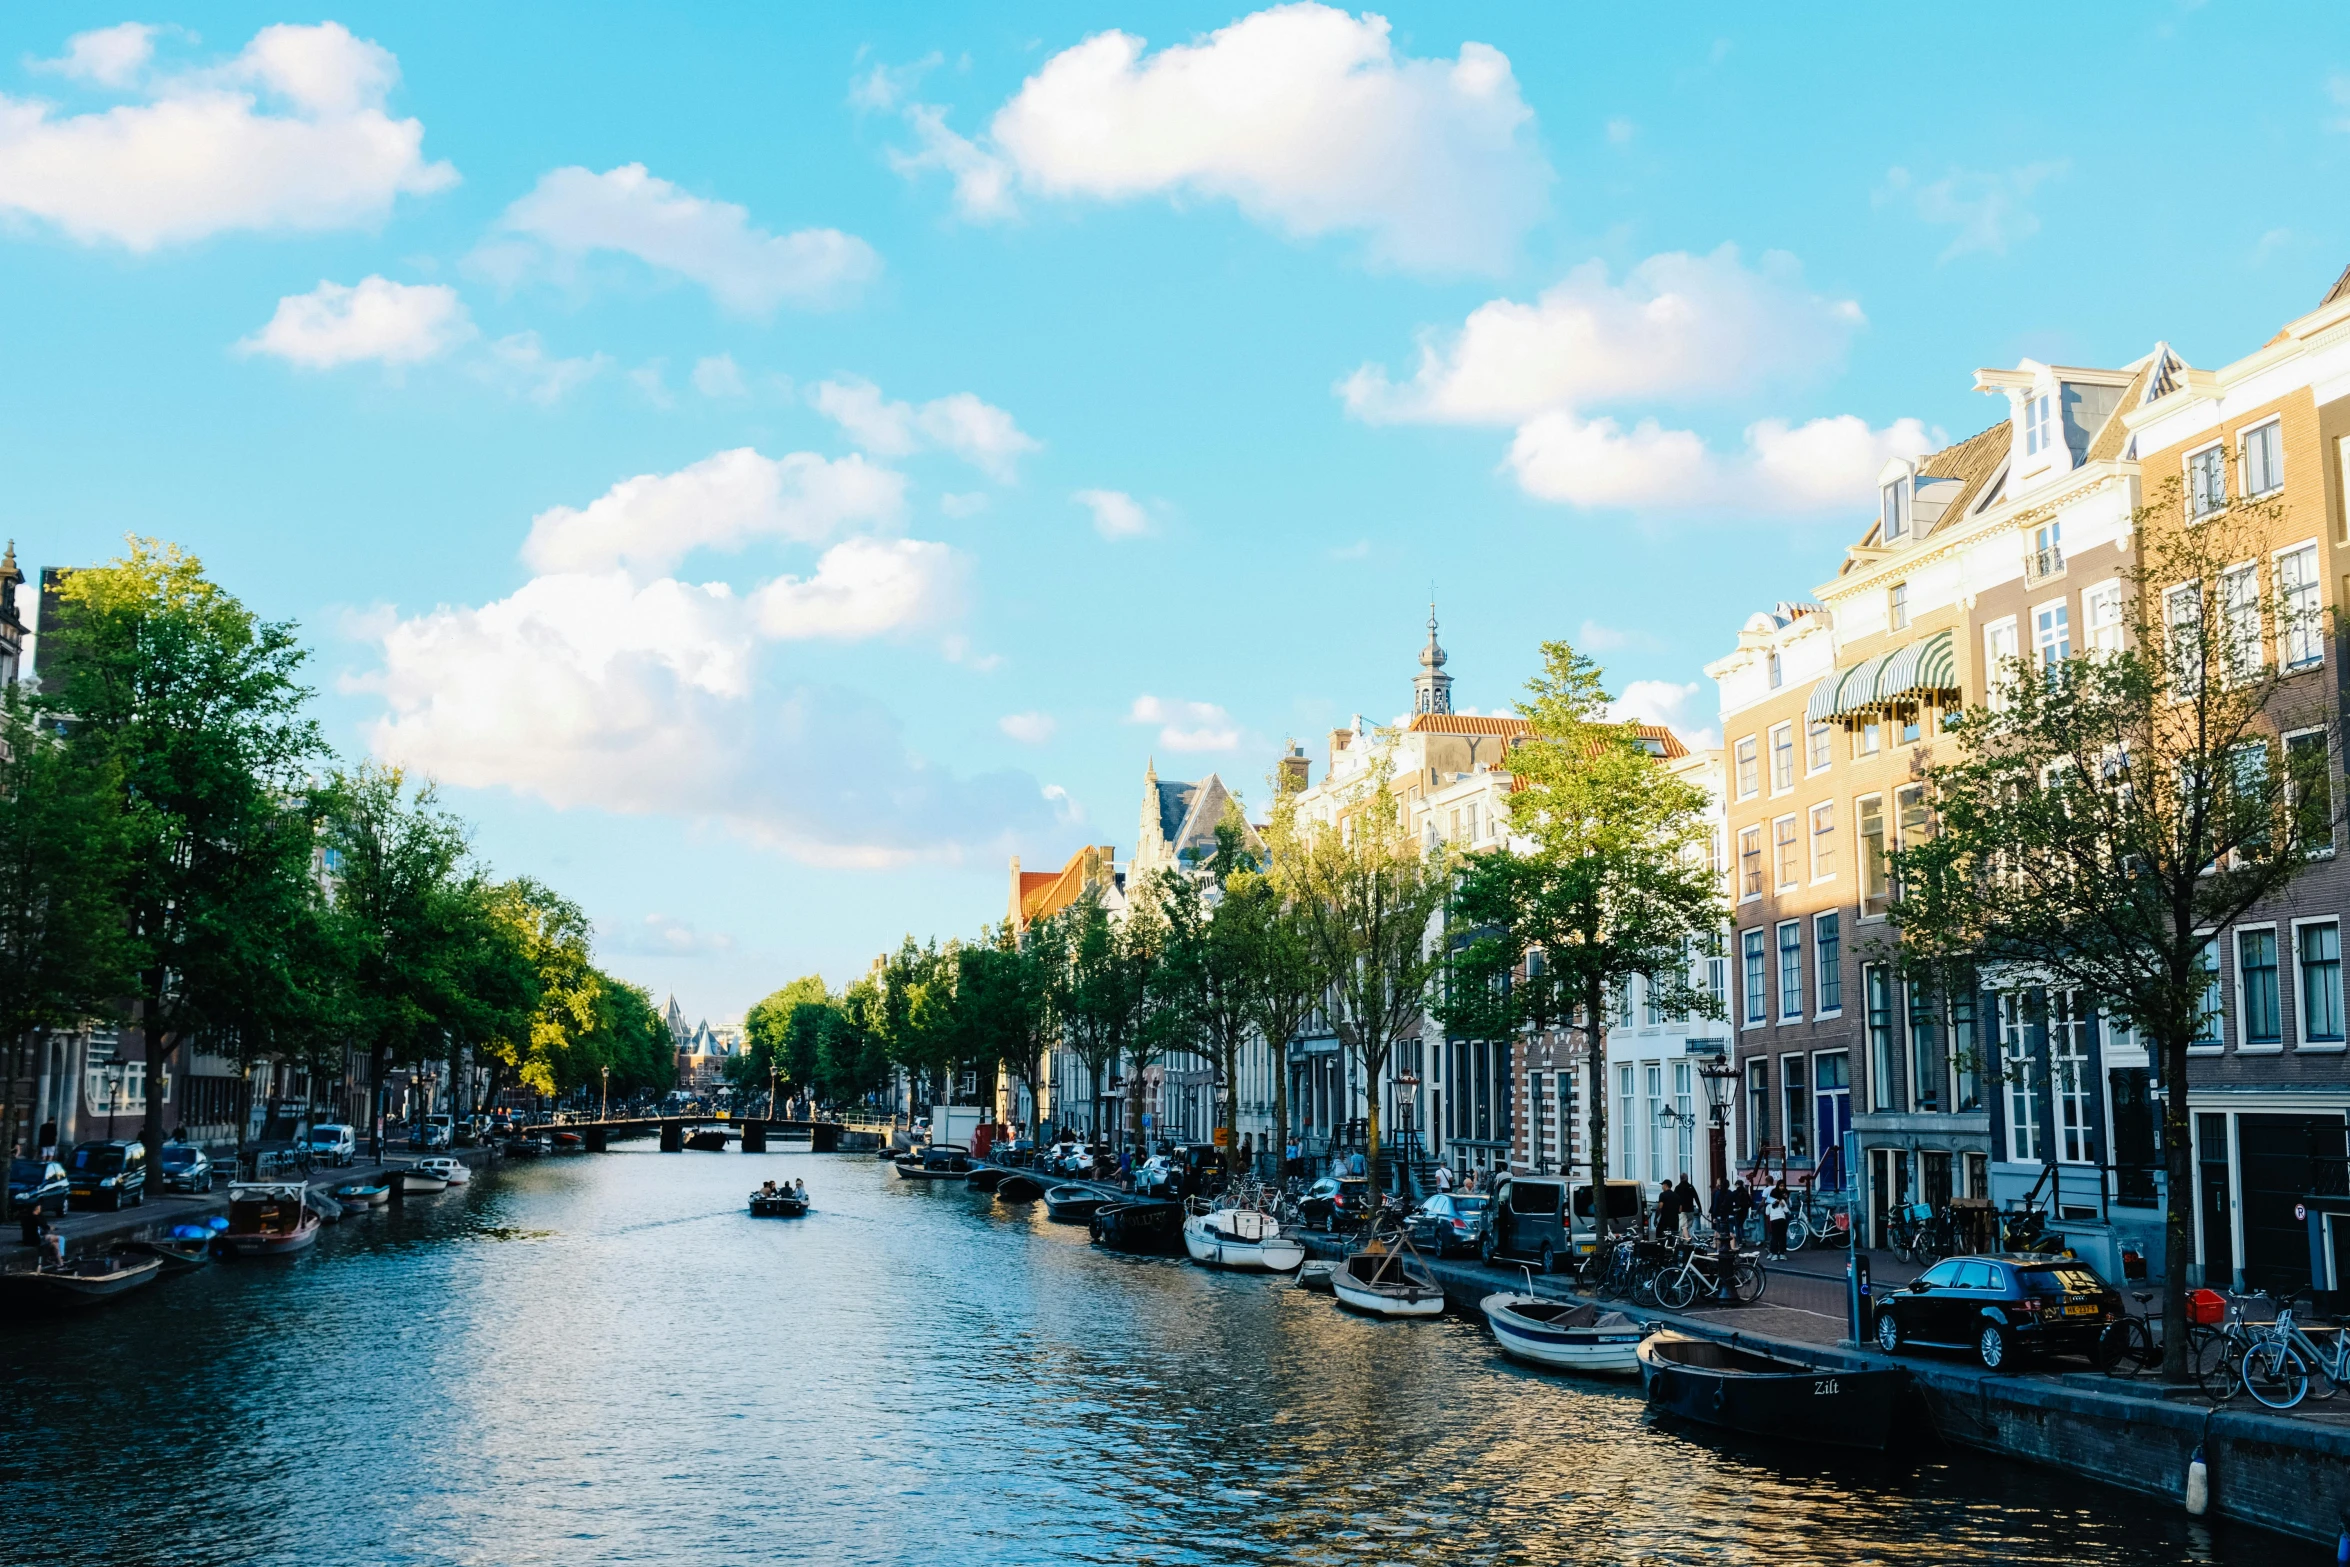 a canal filled with lots of boats next to tall buildings, pexels contest winner, baroque, dutch houses along a river, thumbnail, blue skies, 🦩🪐🐞👩🏻🦳